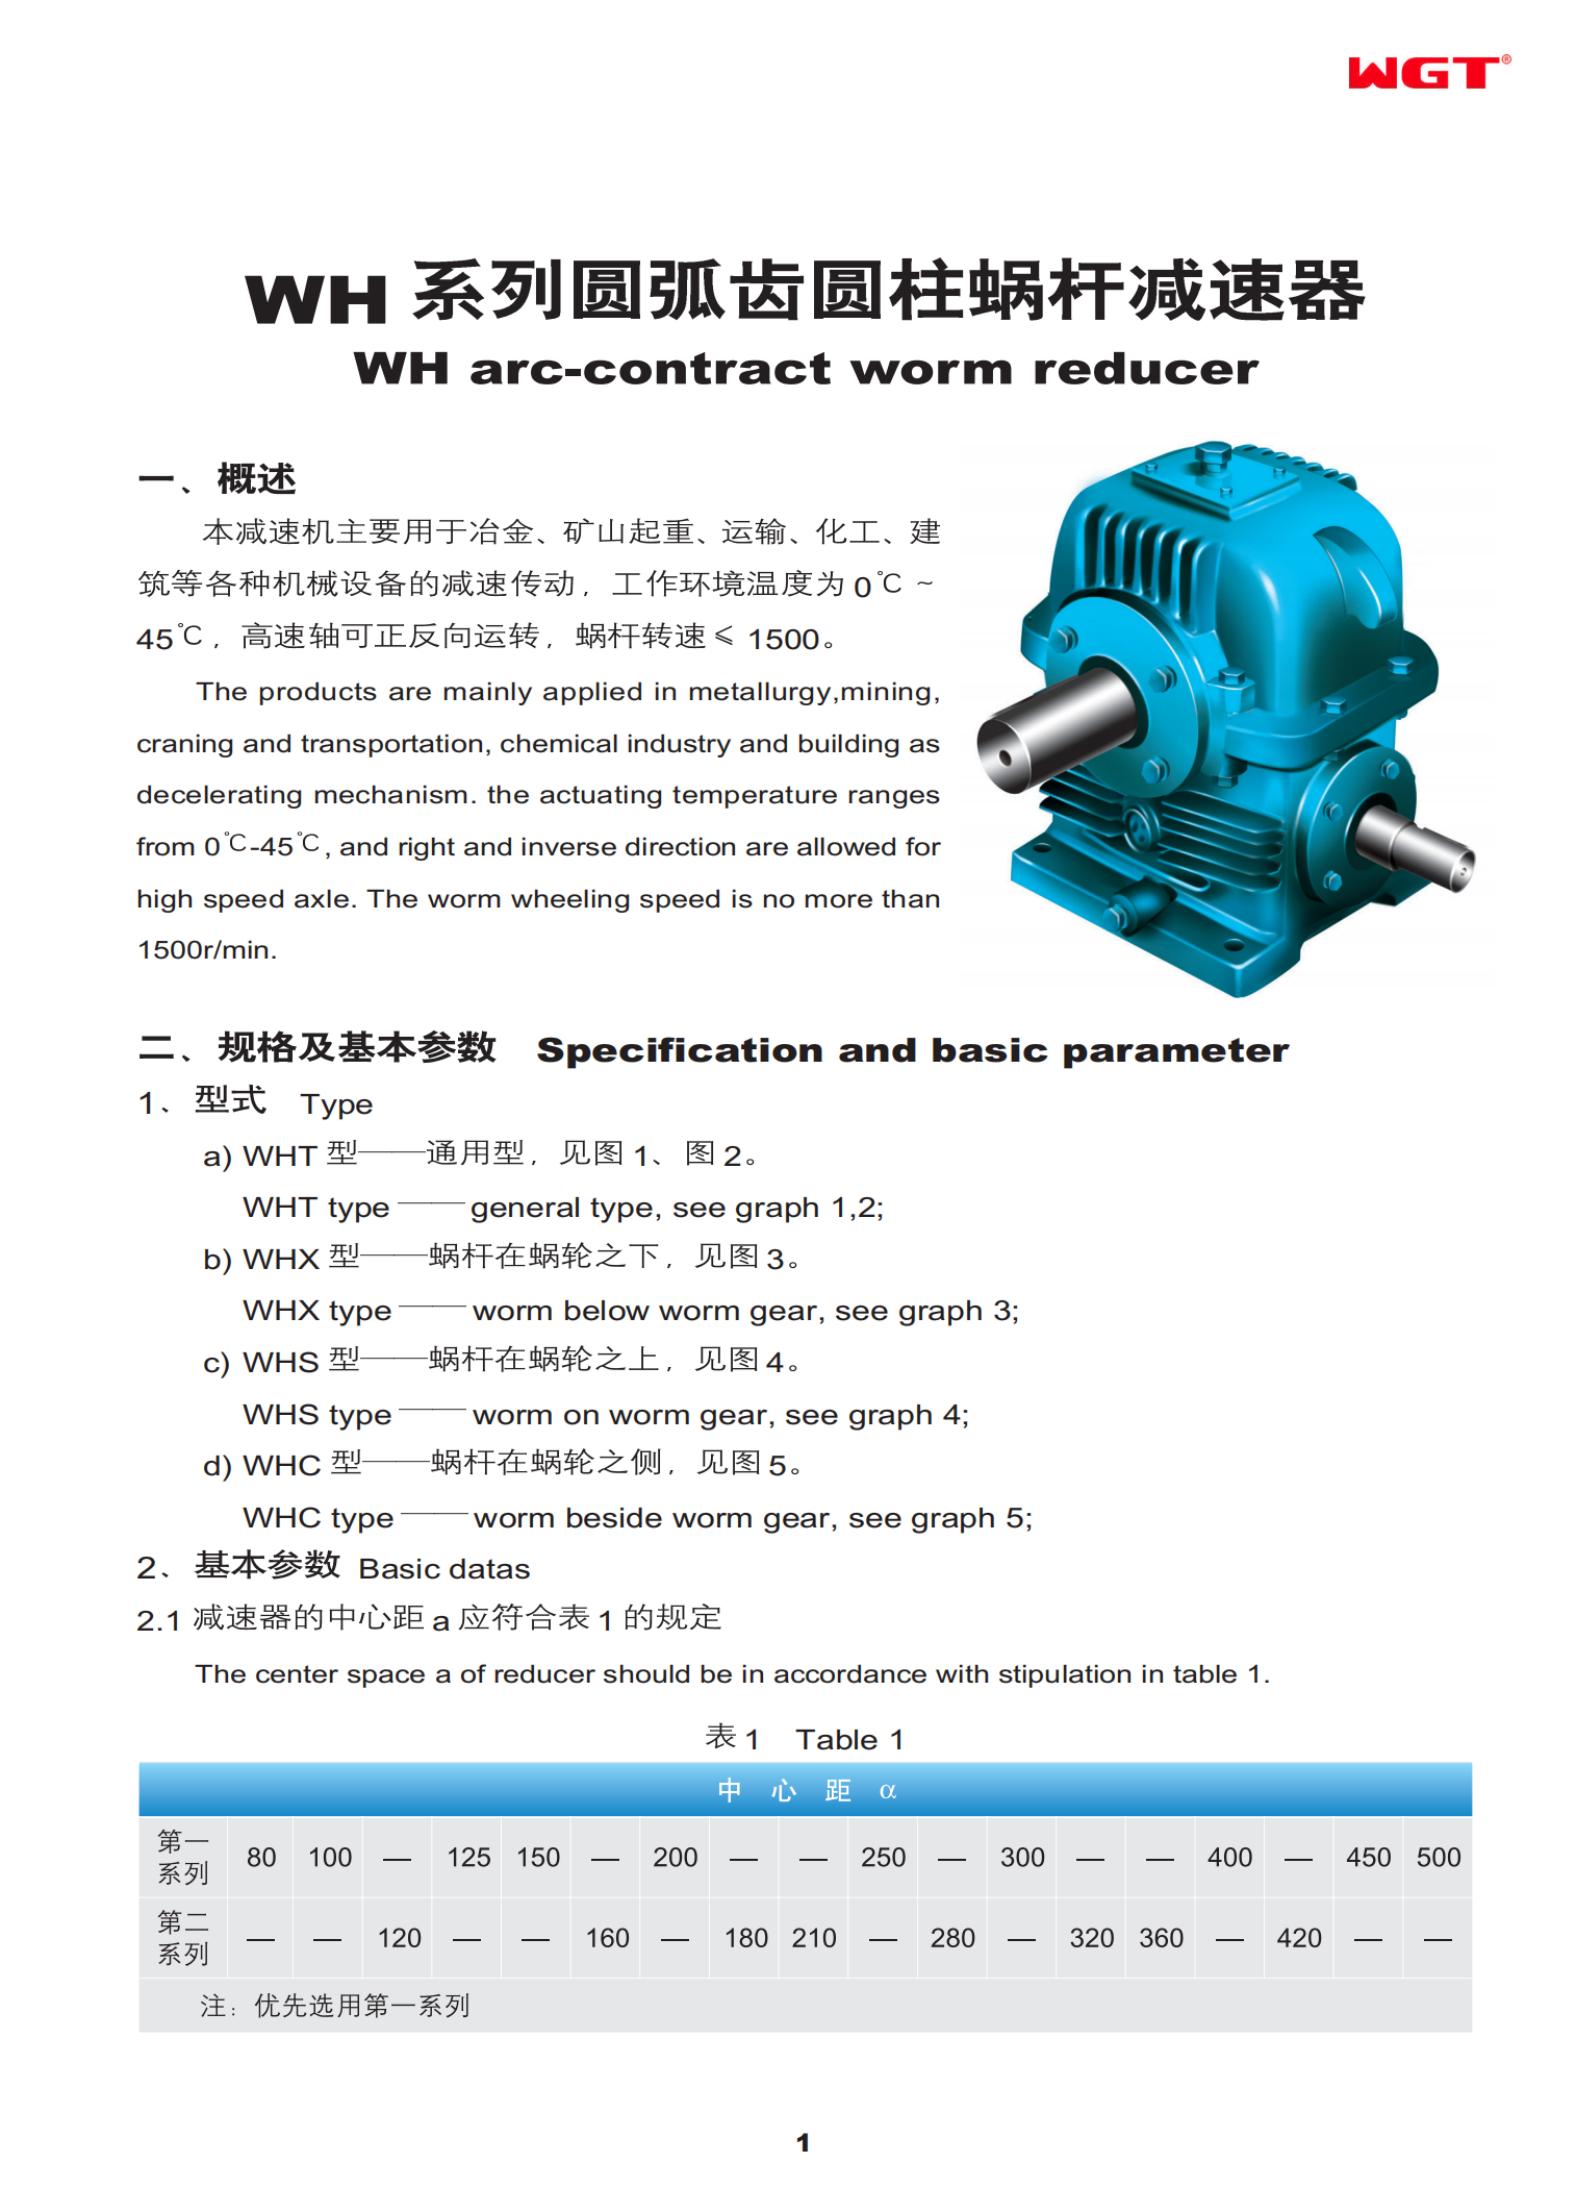 WHT10 WH arc-contract worm reducer